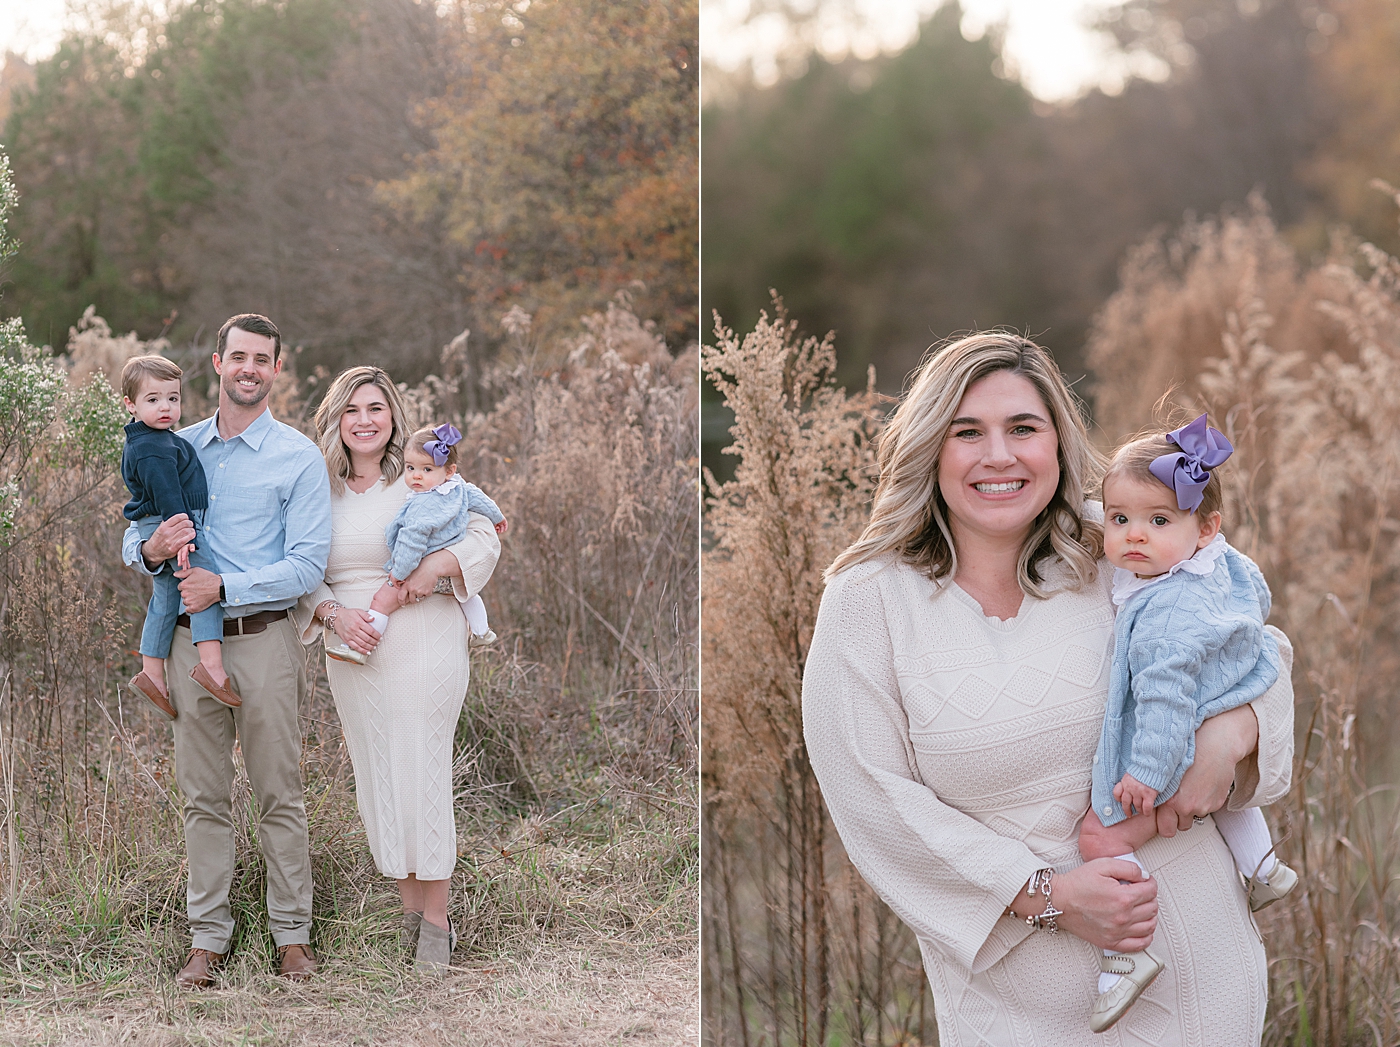 Family of four smiling during baby girl's Milestone Session in Charlotte | Photo by Anna Wisjo Photography 